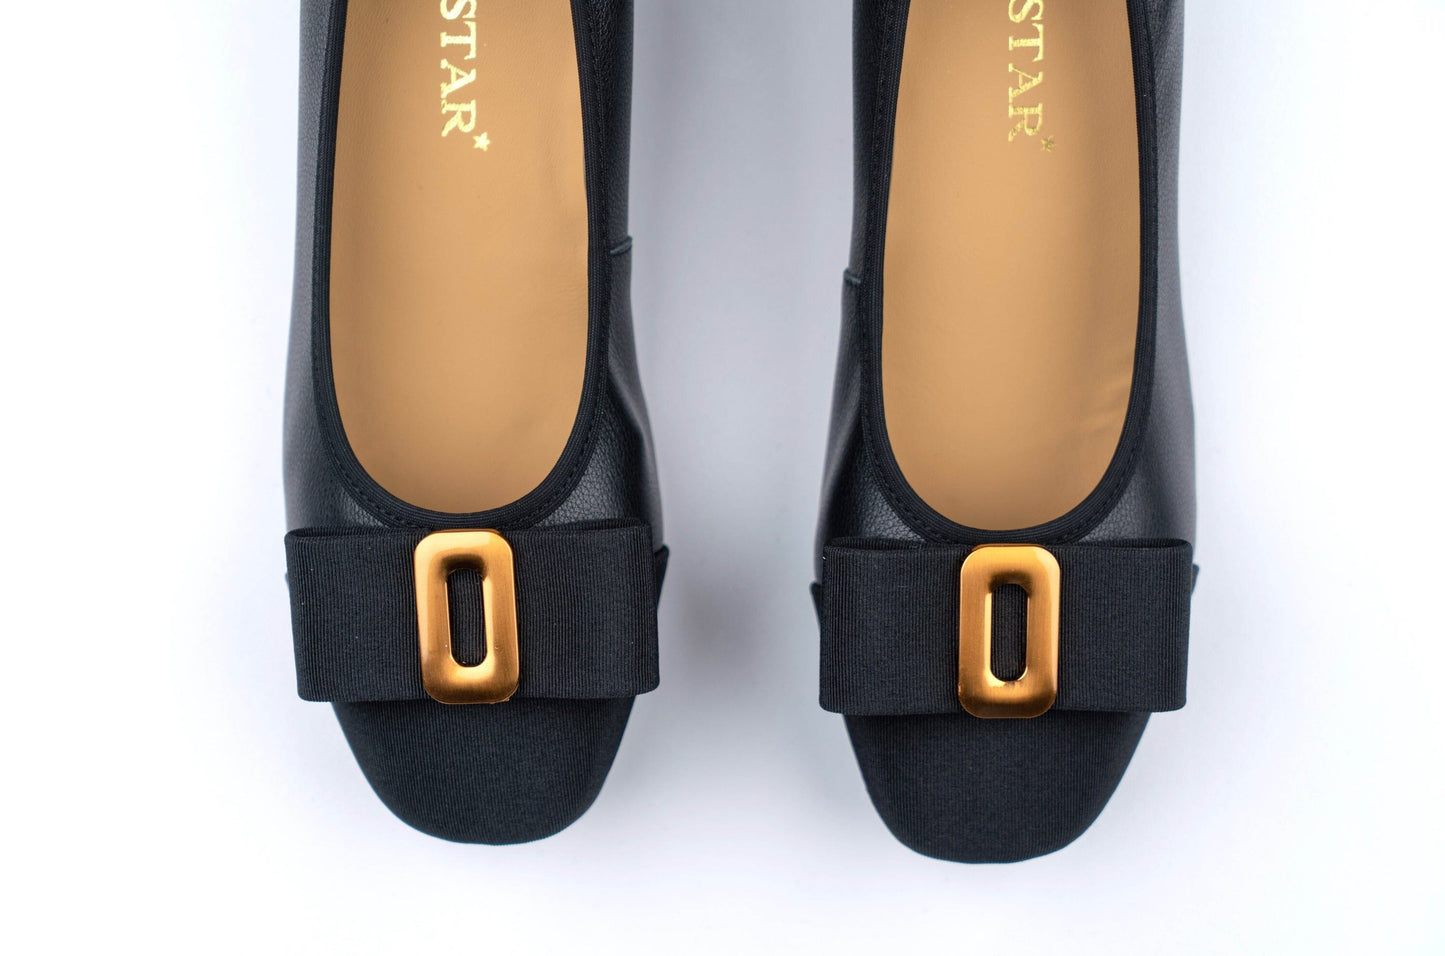 SS23002 Leather pumps with bow& gold buckle block heel ( new arrival ) Pumps Sam Star shoes Black 39/6 